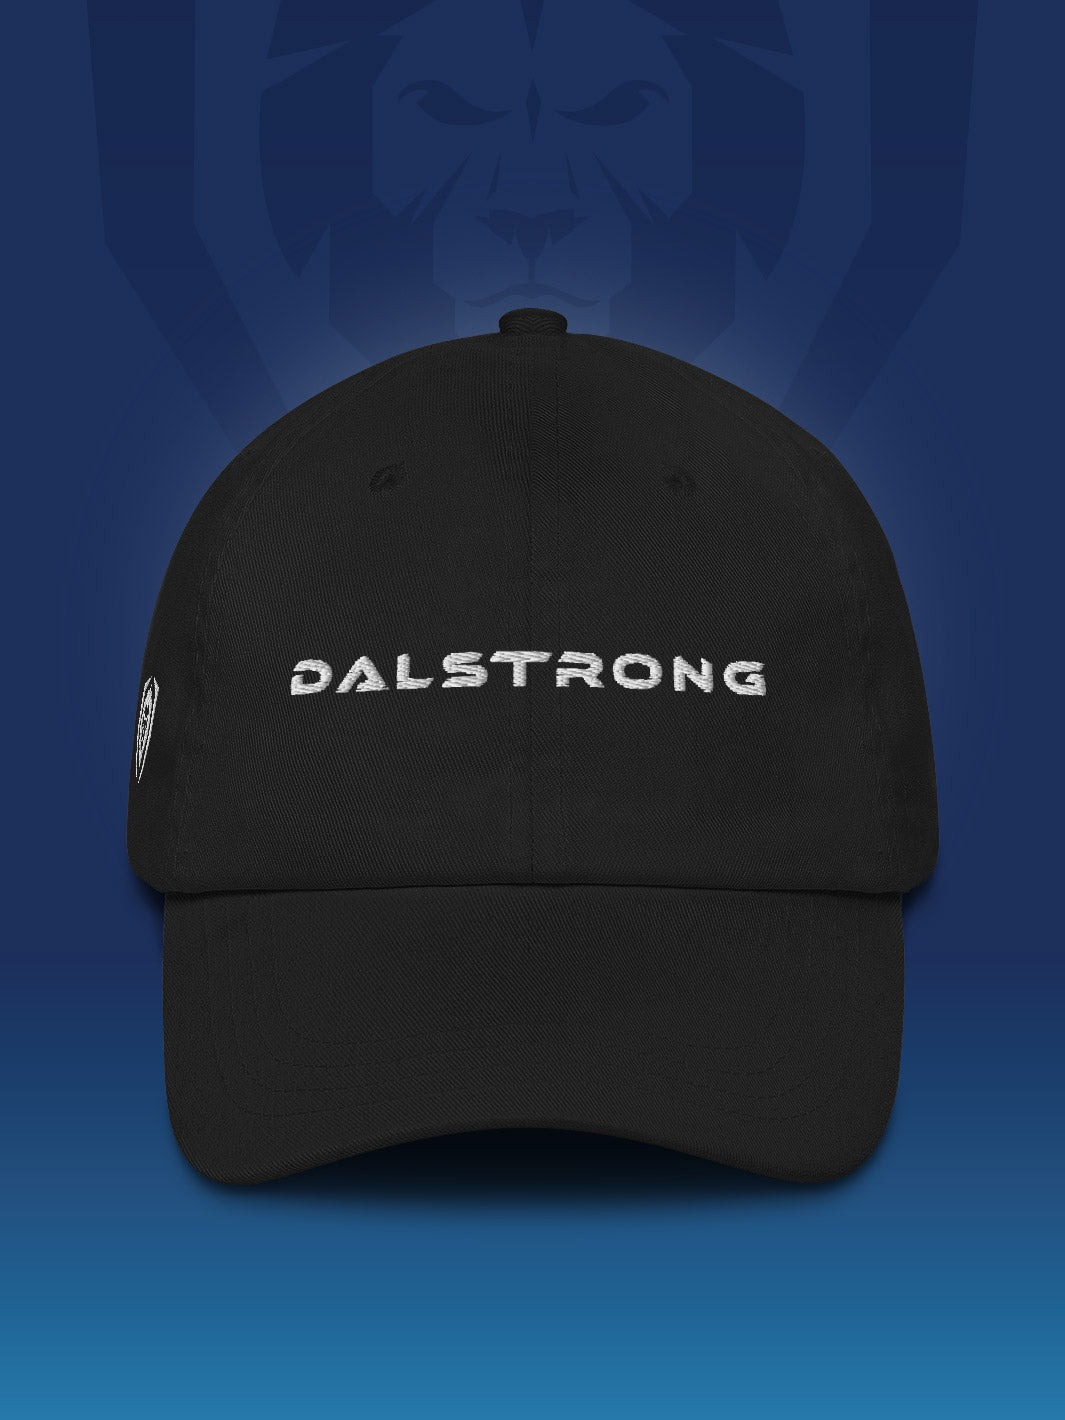 Dalstrong apparel the not just for dad hat black.